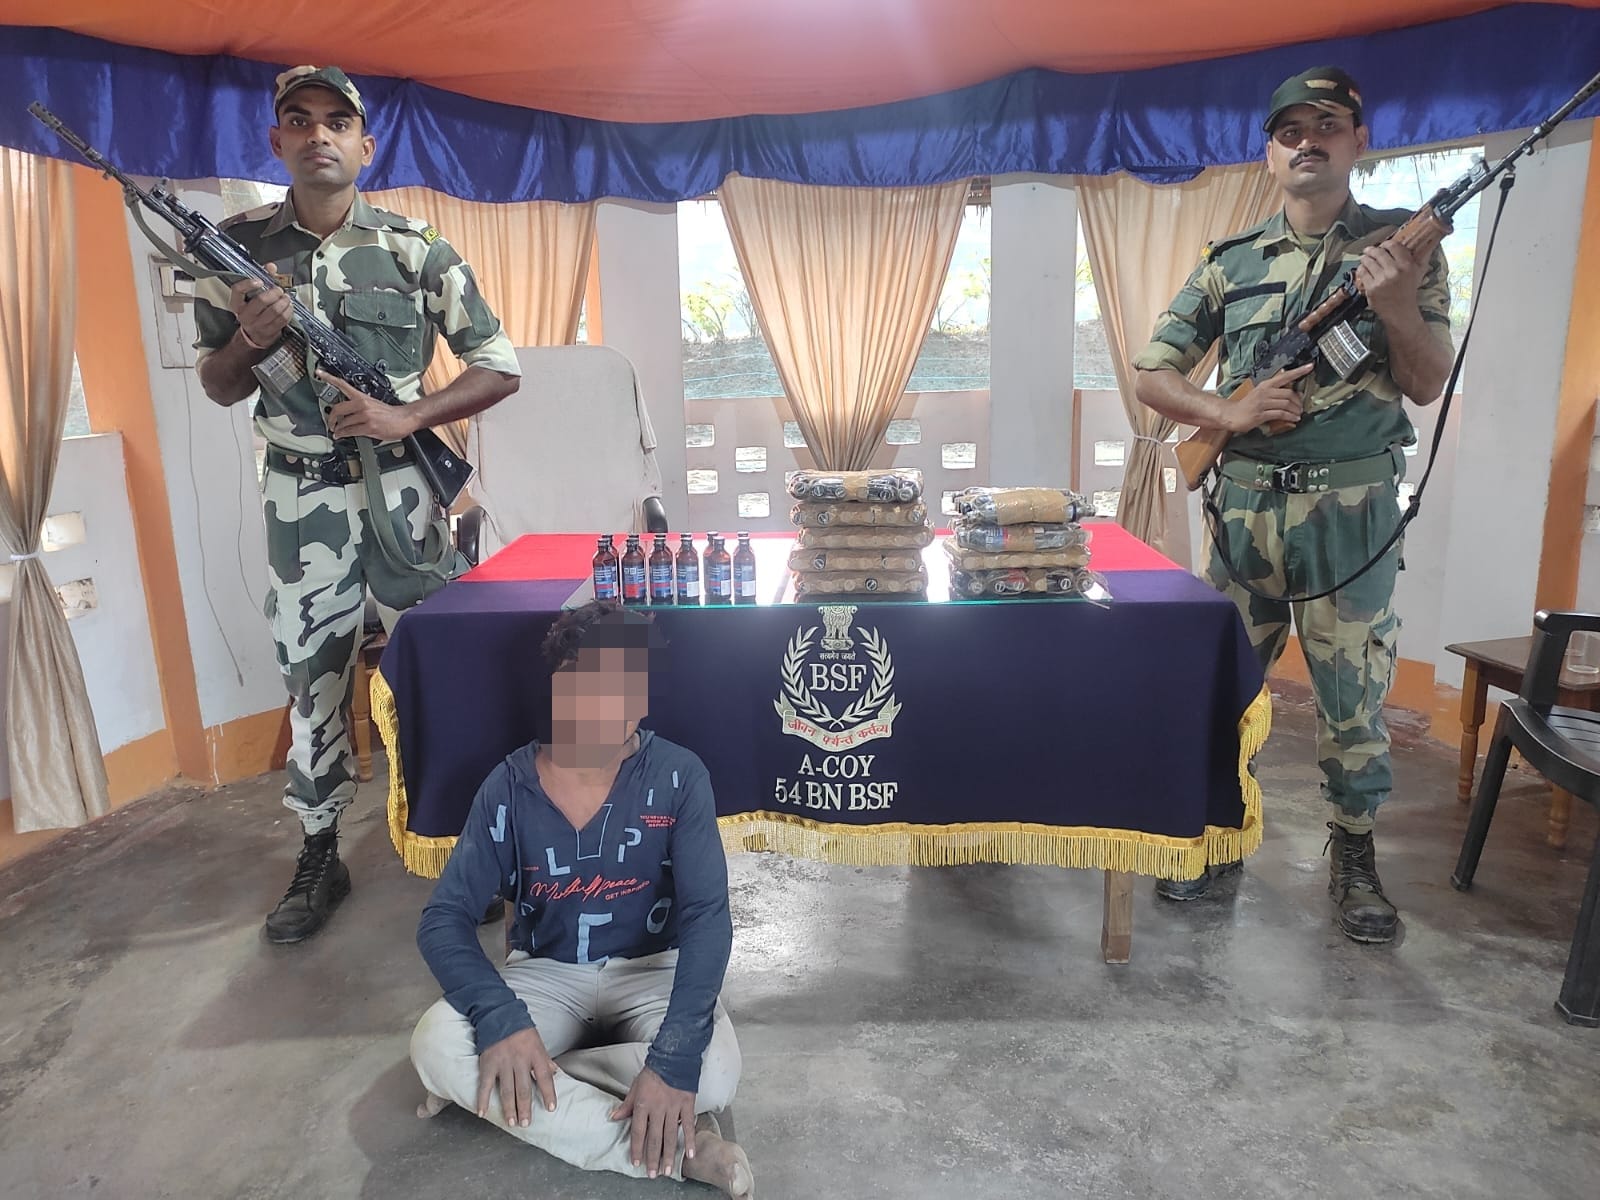 BSF JAWANS APPREHENDED 03 SMUGGLERS ON THE BORDER, ALSO SEIZES PHENSEDYL IN HUGE QUANTITIES